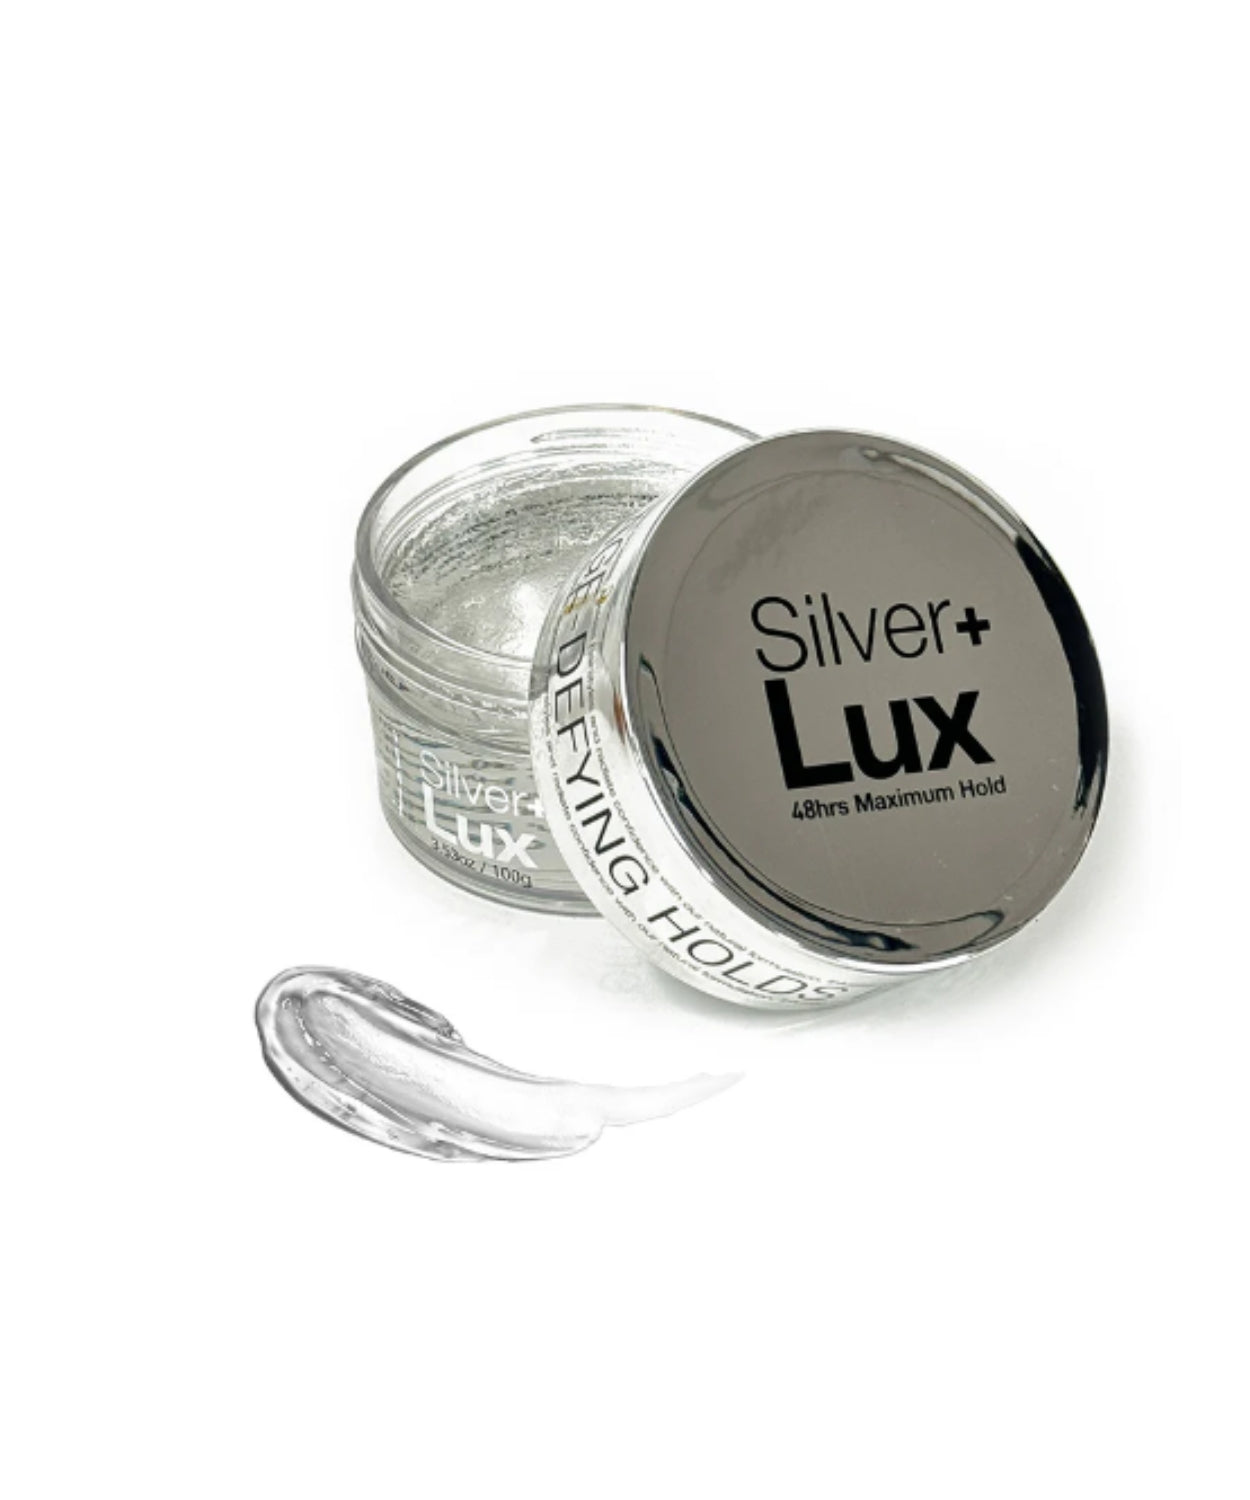 Lux Collection Silver+ Lux 48 Hour Maximum Hold Defying Hair Gel Tamer 3.53oz - BRAID BEAUTY